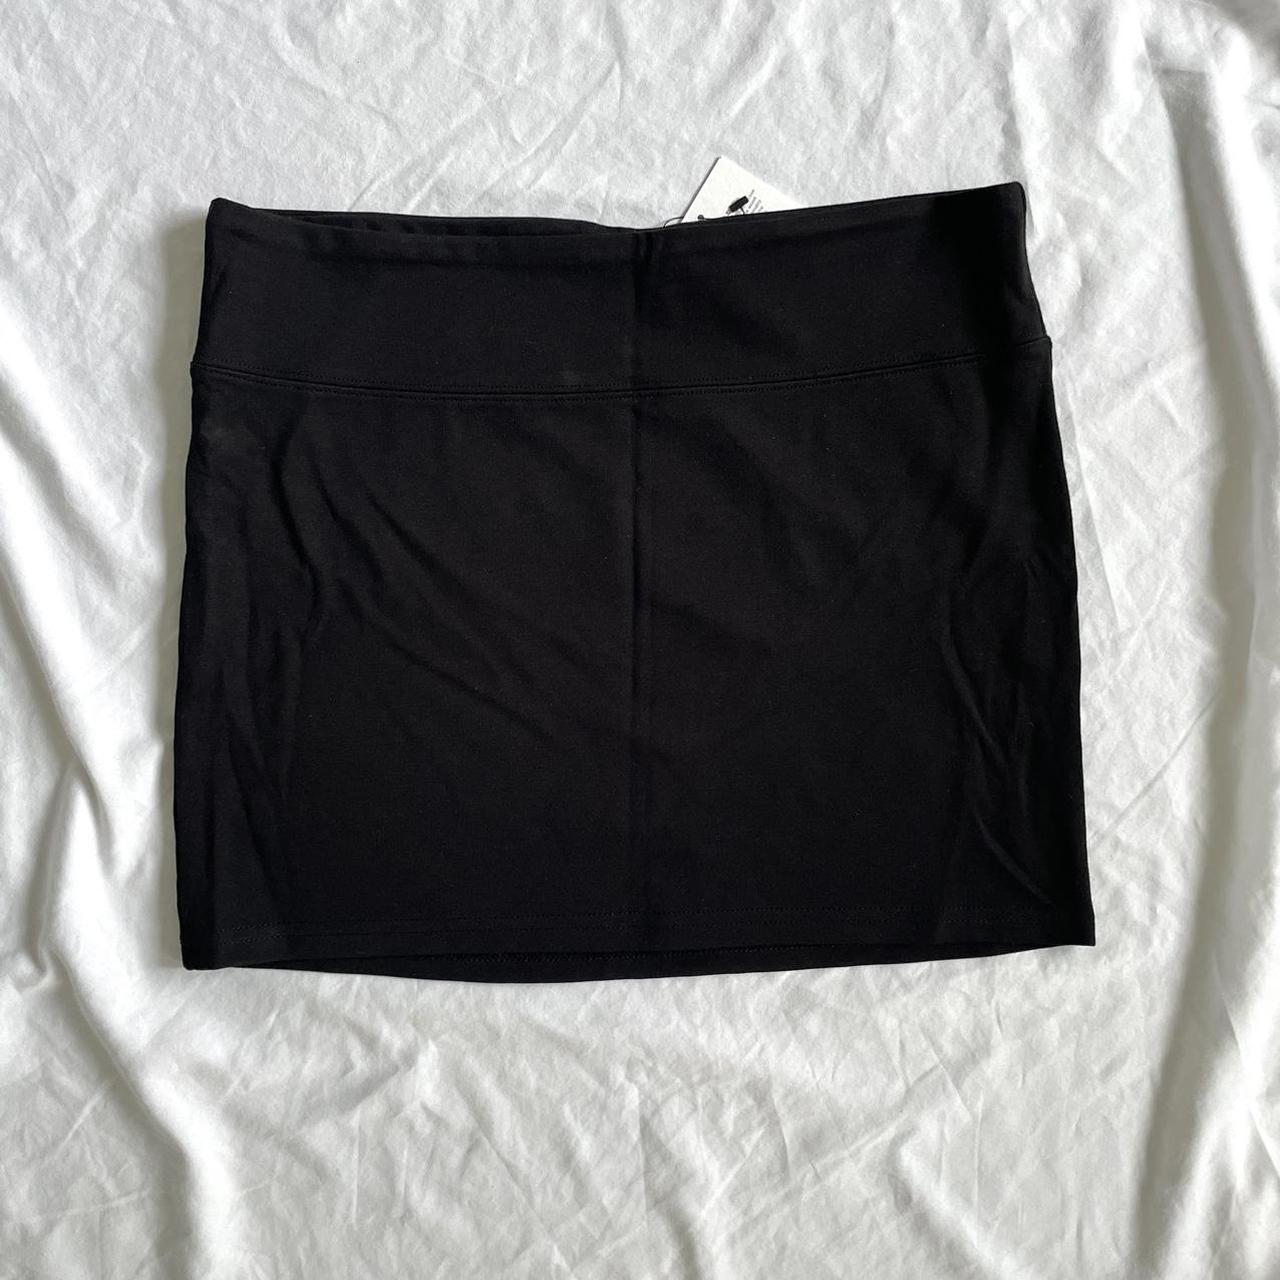 glassons mid rise ponte mini skirt. brand new with... - Depop